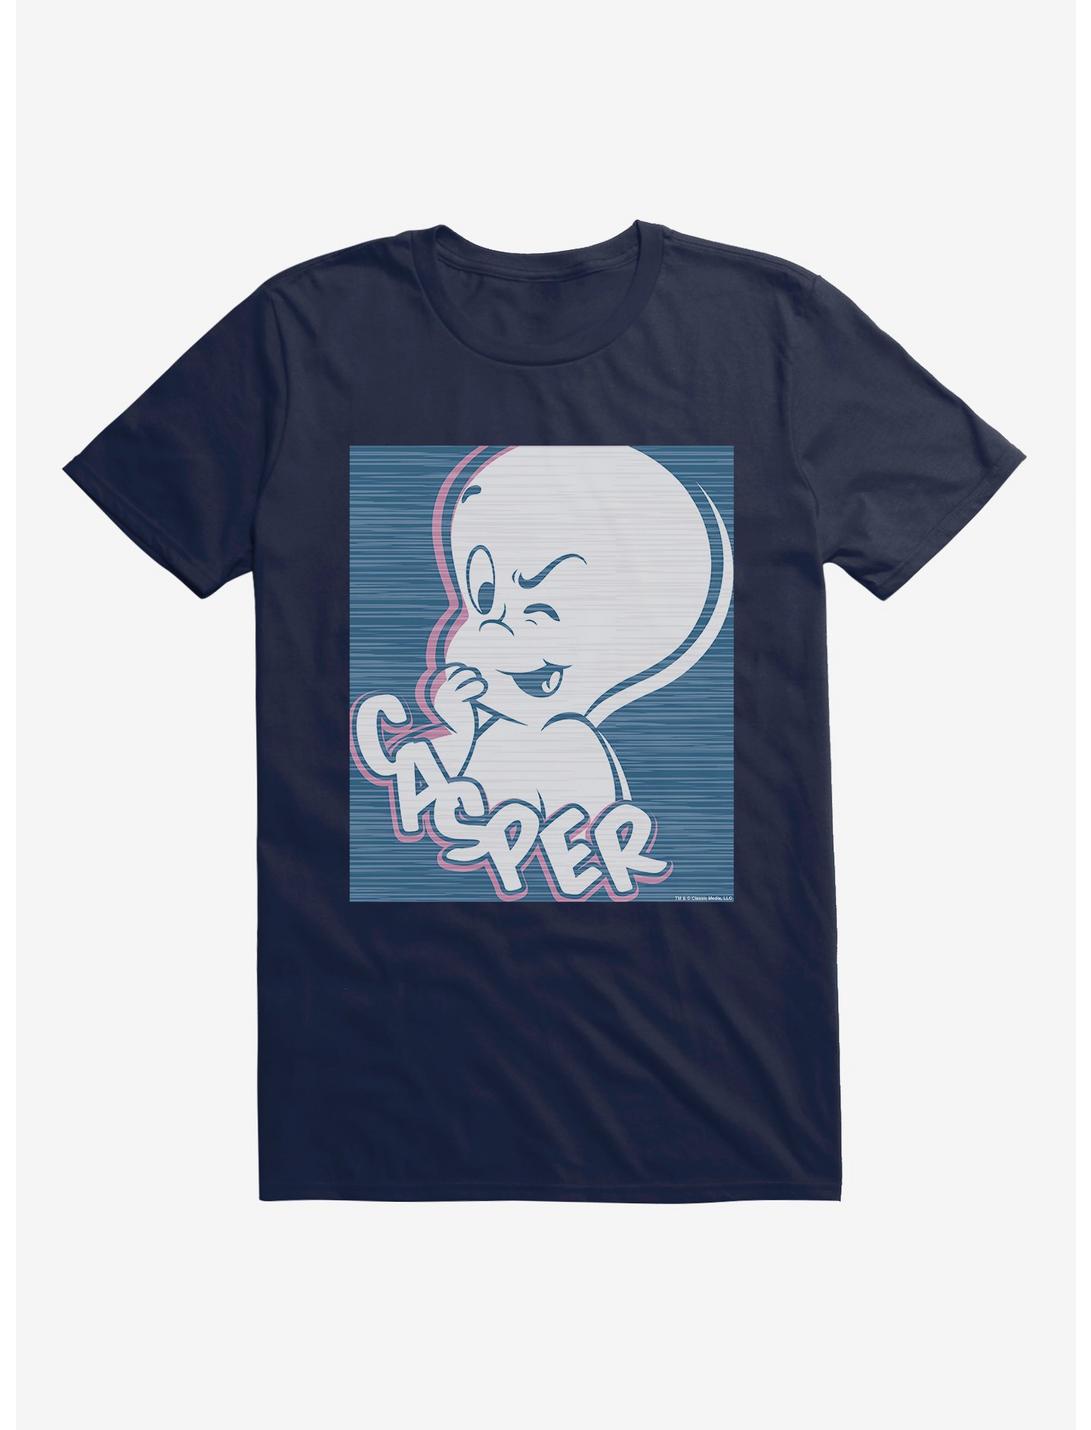 Casper The Friendly Ghost Up To Something T-Shirt, MIDNIGHT NAVY, hi-res